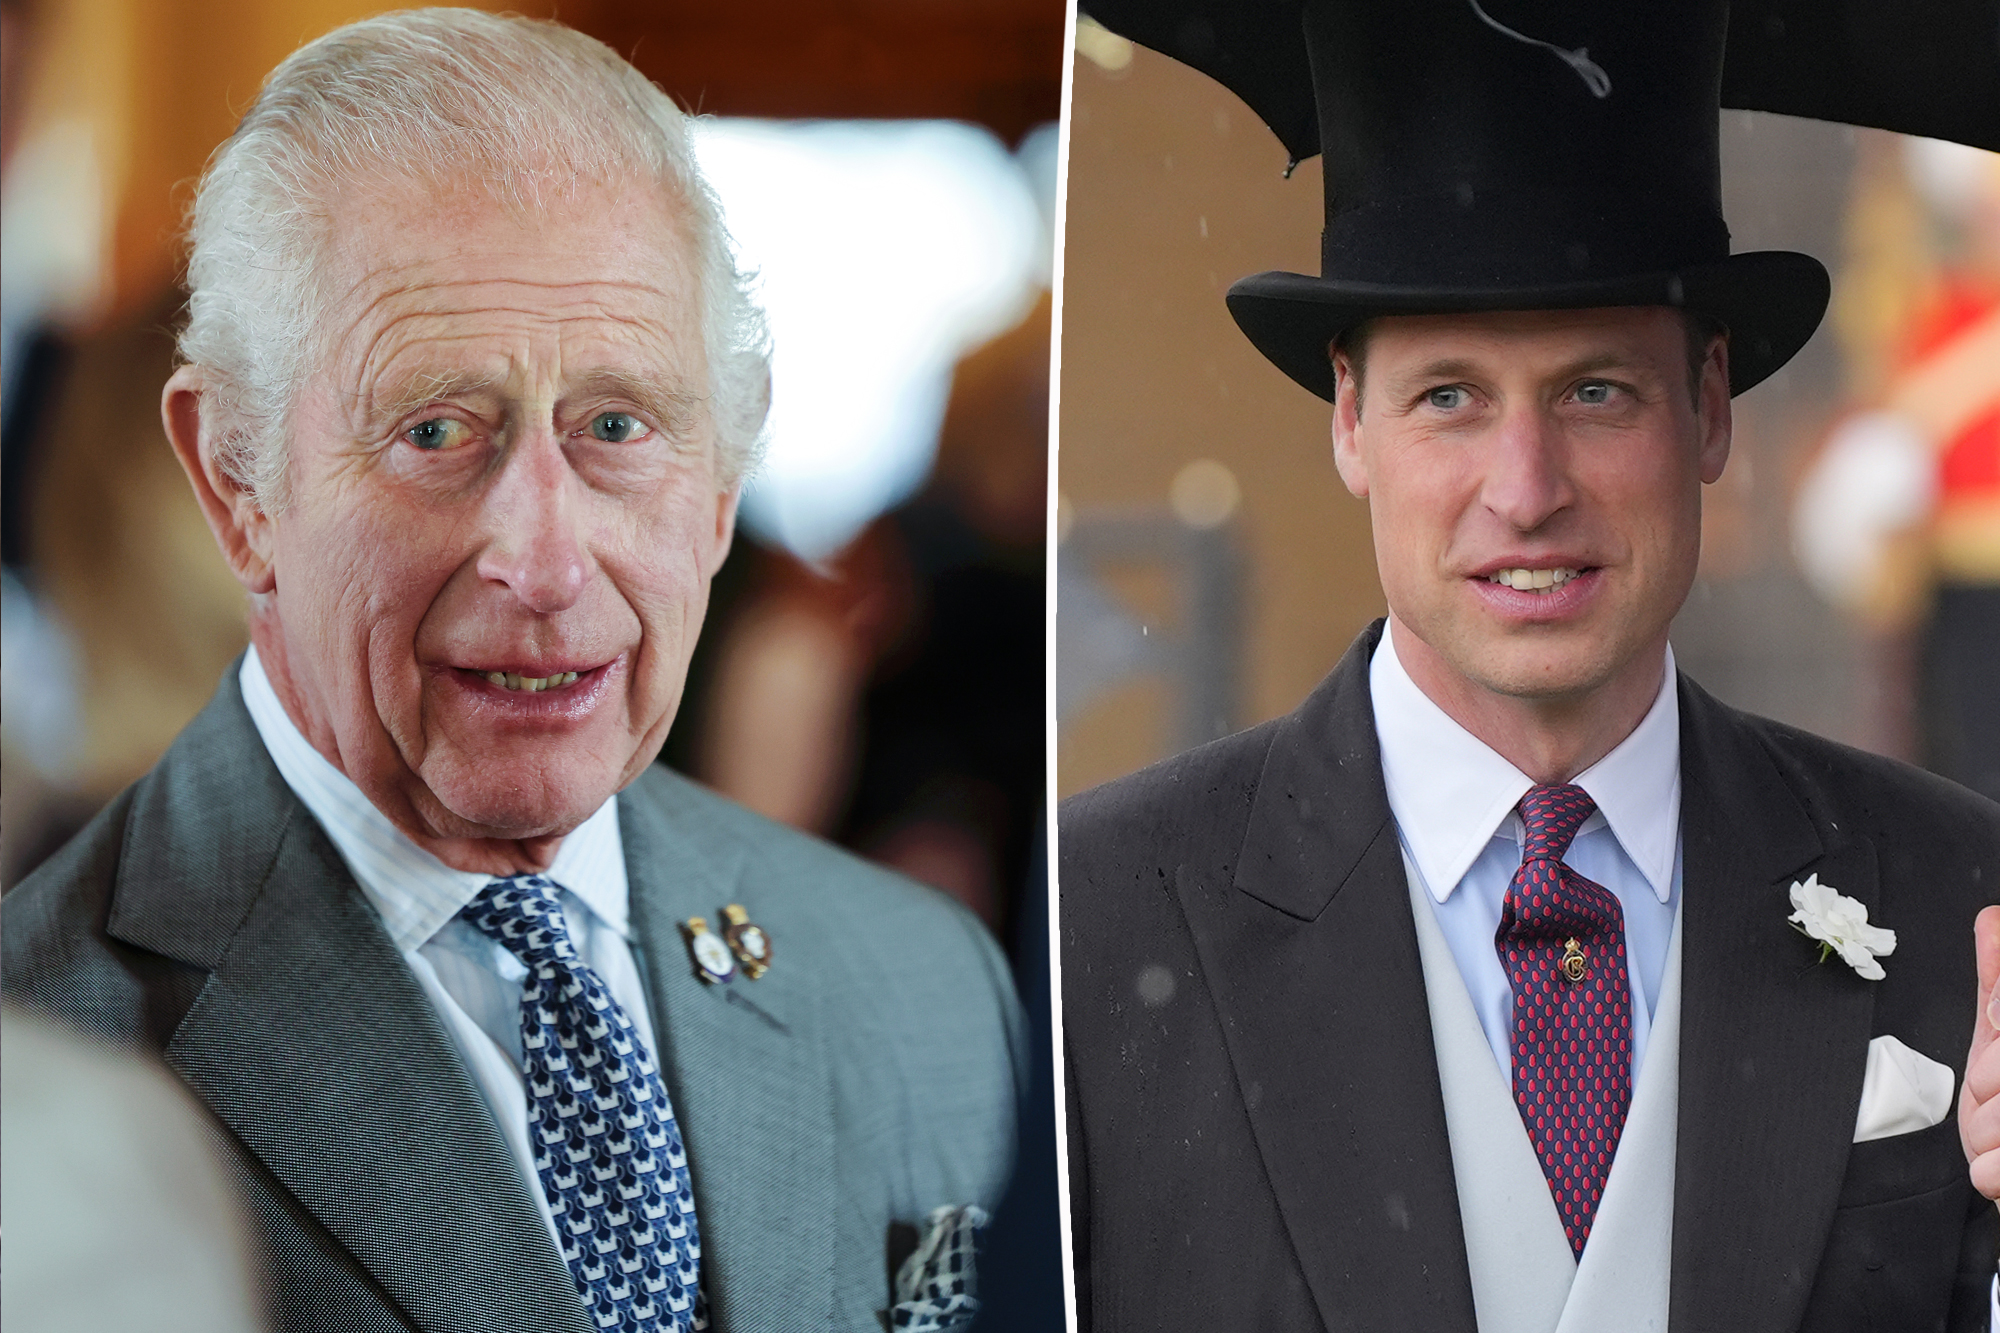 King Charles and Prince William Alter Royal Schedules Due to General Election